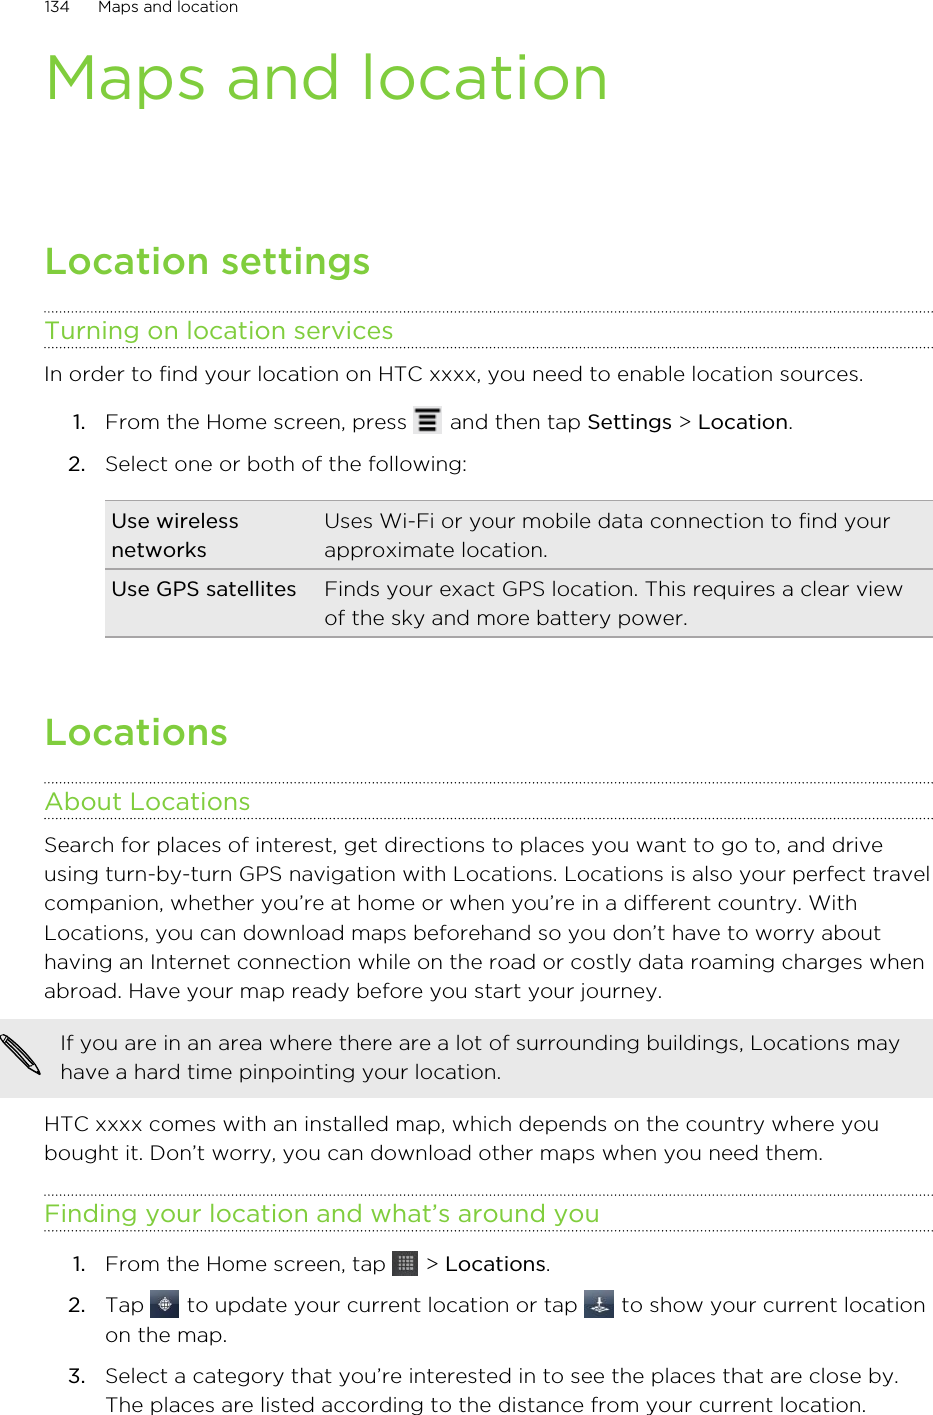 Maps and locationLocation settingsTurning on location servicesIn order to find your location on HTC xxxx, you need to enable location sources.1. From the Home screen, press   and then tap Settings &gt; Location.2. Select one or both of the following:Use wirelessnetworksUses Wi-Fi or your mobile data connection to find yourapproximate location.Use GPS satellites Finds your exact GPS location. This requires a clear viewof the sky and more battery power.LocationsAbout LocationsSearch for places of interest, get directions to places you want to go to, and driveusing turn-by-turn GPS navigation with Locations. Locations is also your perfect travelcompanion, whether you’re at home or when you’re in a different country. WithLocations, you can download maps beforehand so you don’t have to worry abouthaving an Internet connection while on the road or costly data roaming charges whenabroad. Have your map ready before you start your journey.If you are in an area where there are a lot of surrounding buildings, Locations mayhave a hard time pinpointing your location.HTC xxxx comes with an installed map, which depends on the country where youbought it. Don’t worry, you can download other maps when you need them.Finding your location and what’s around you1. From the Home screen, tap   &gt; Locations.2. Tap   to update your current location or tap   to show your current locationon the map.3. Select a category that you’re interested in to see the places that are close by.The places are listed according to the distance from your current location.134 Maps and location